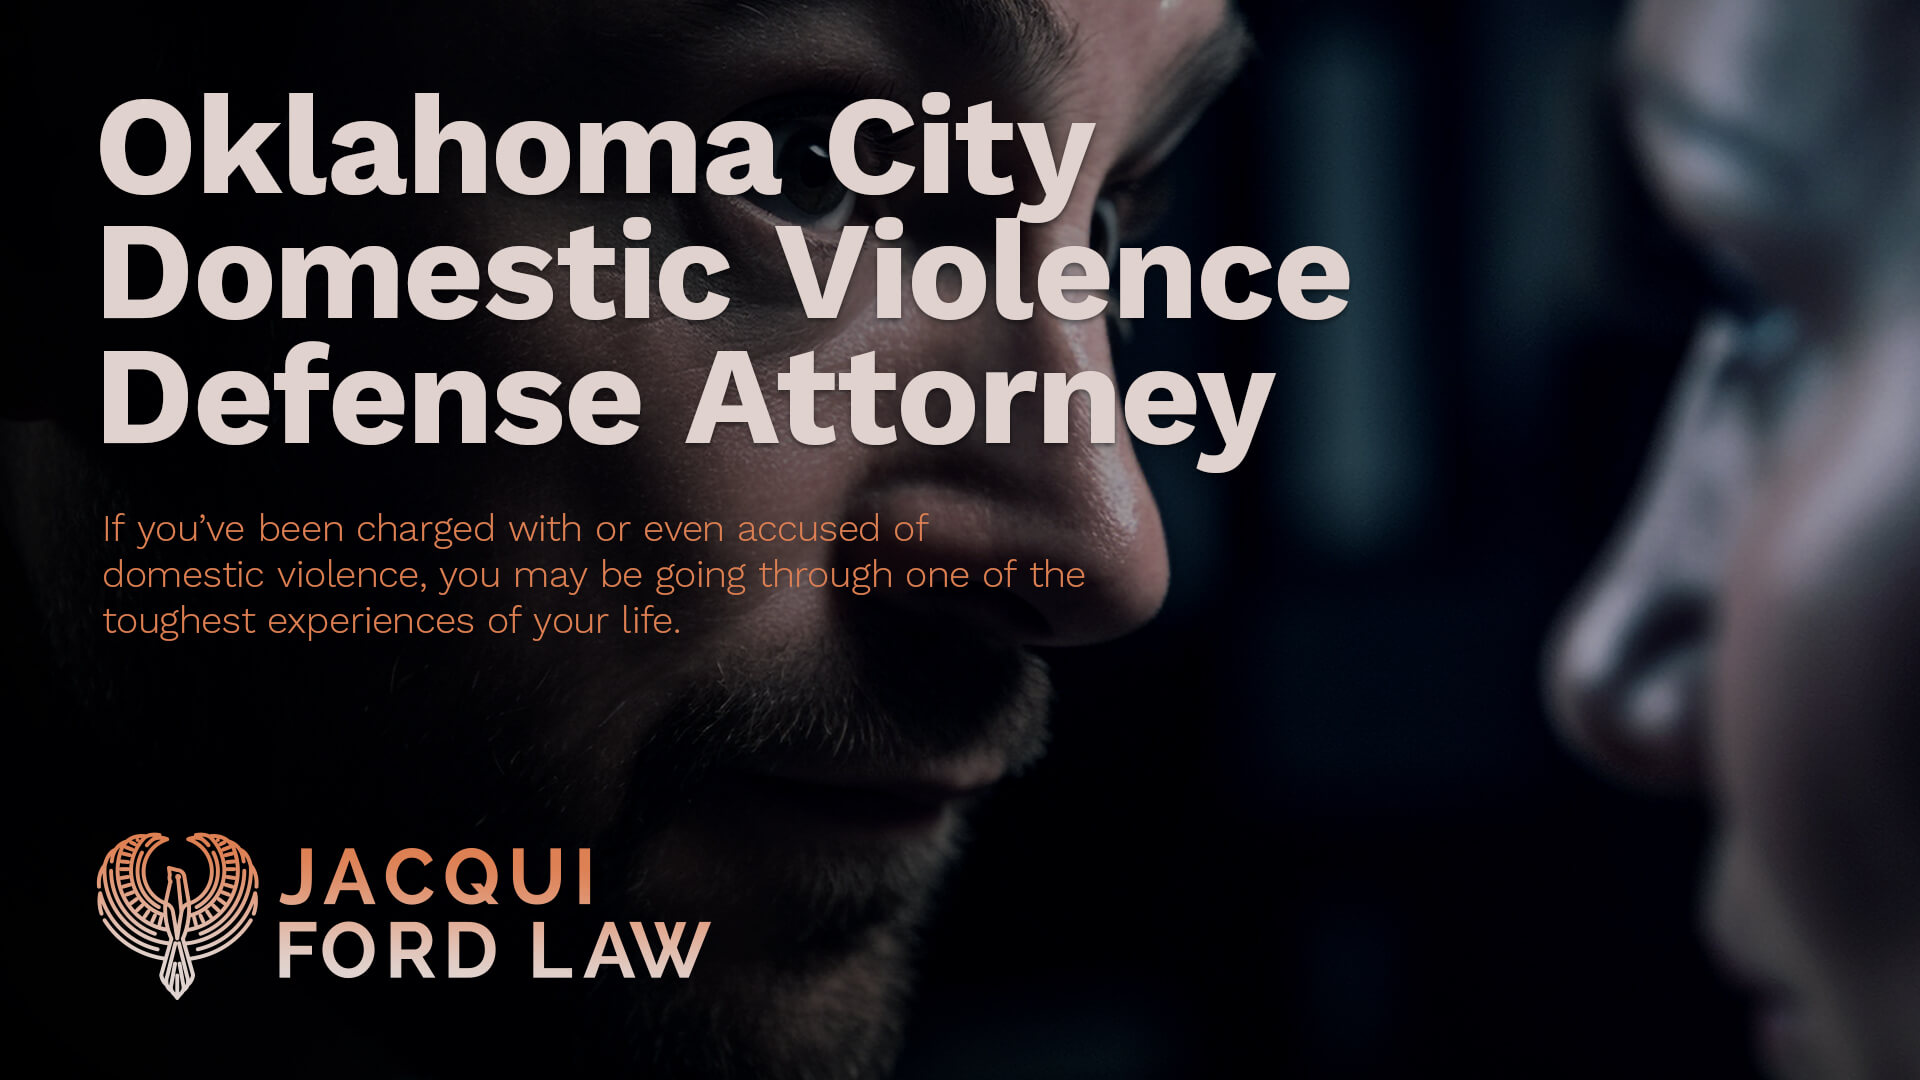 Domestic-Violence-Jacqui-Ford-Law-Criminal-Defense-Lawyer-Oklahoma-City-Feat-PP